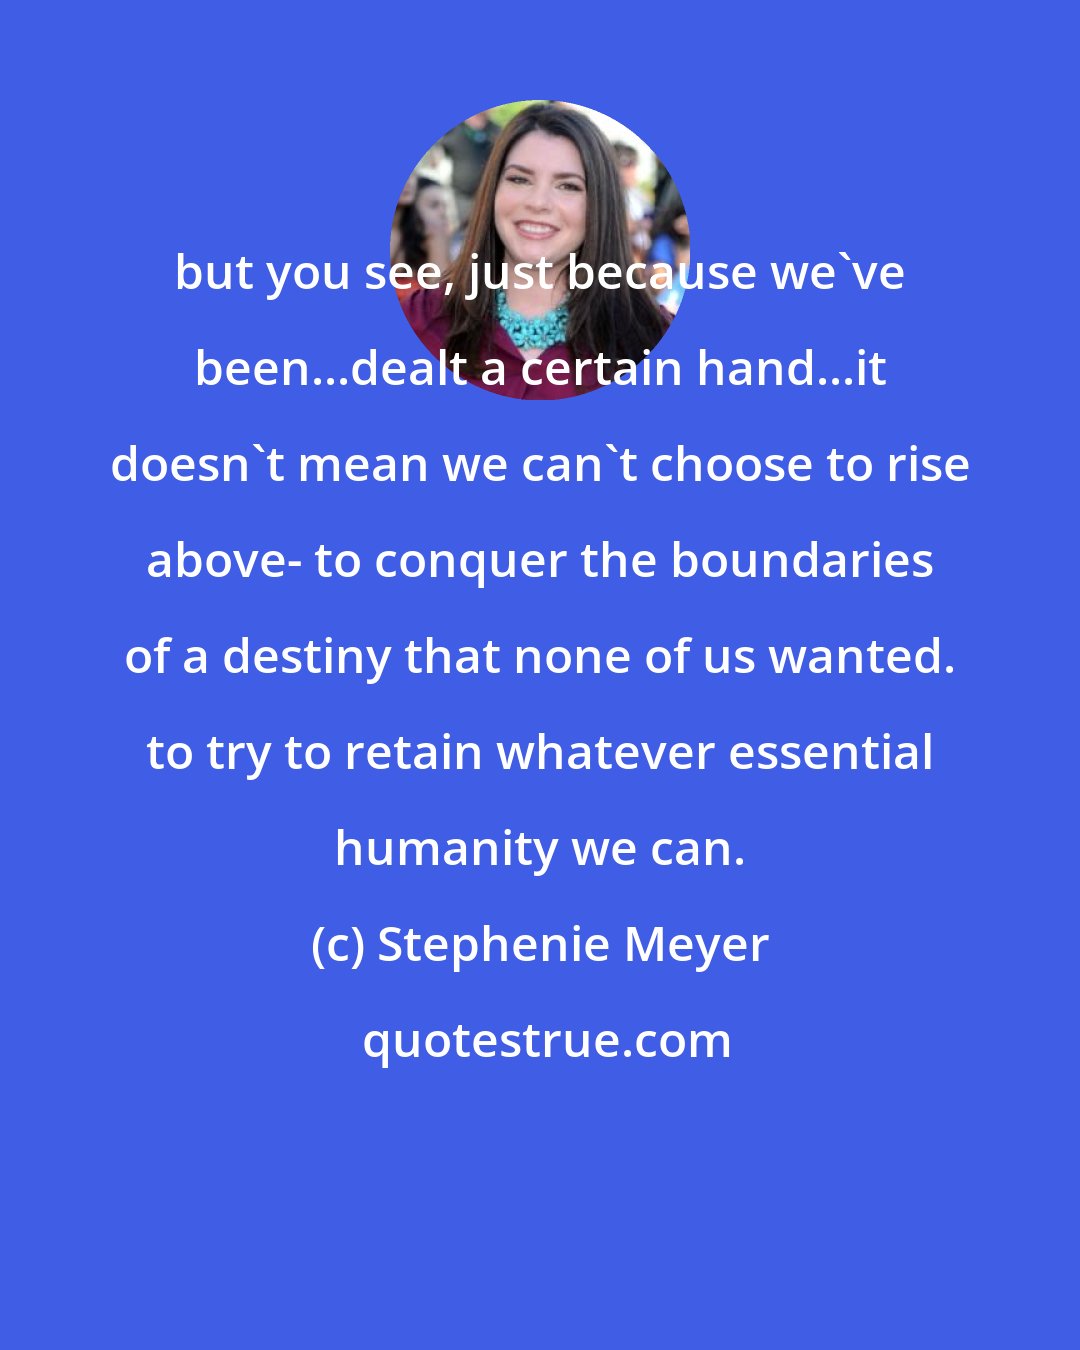 Stephenie Meyer: but you see, just because we've been...dealt a certain hand...it doesn't mean we can't choose to rise above- to conquer the boundaries of a destiny that none of us wanted. to try to retain whatever essential humanity we can.